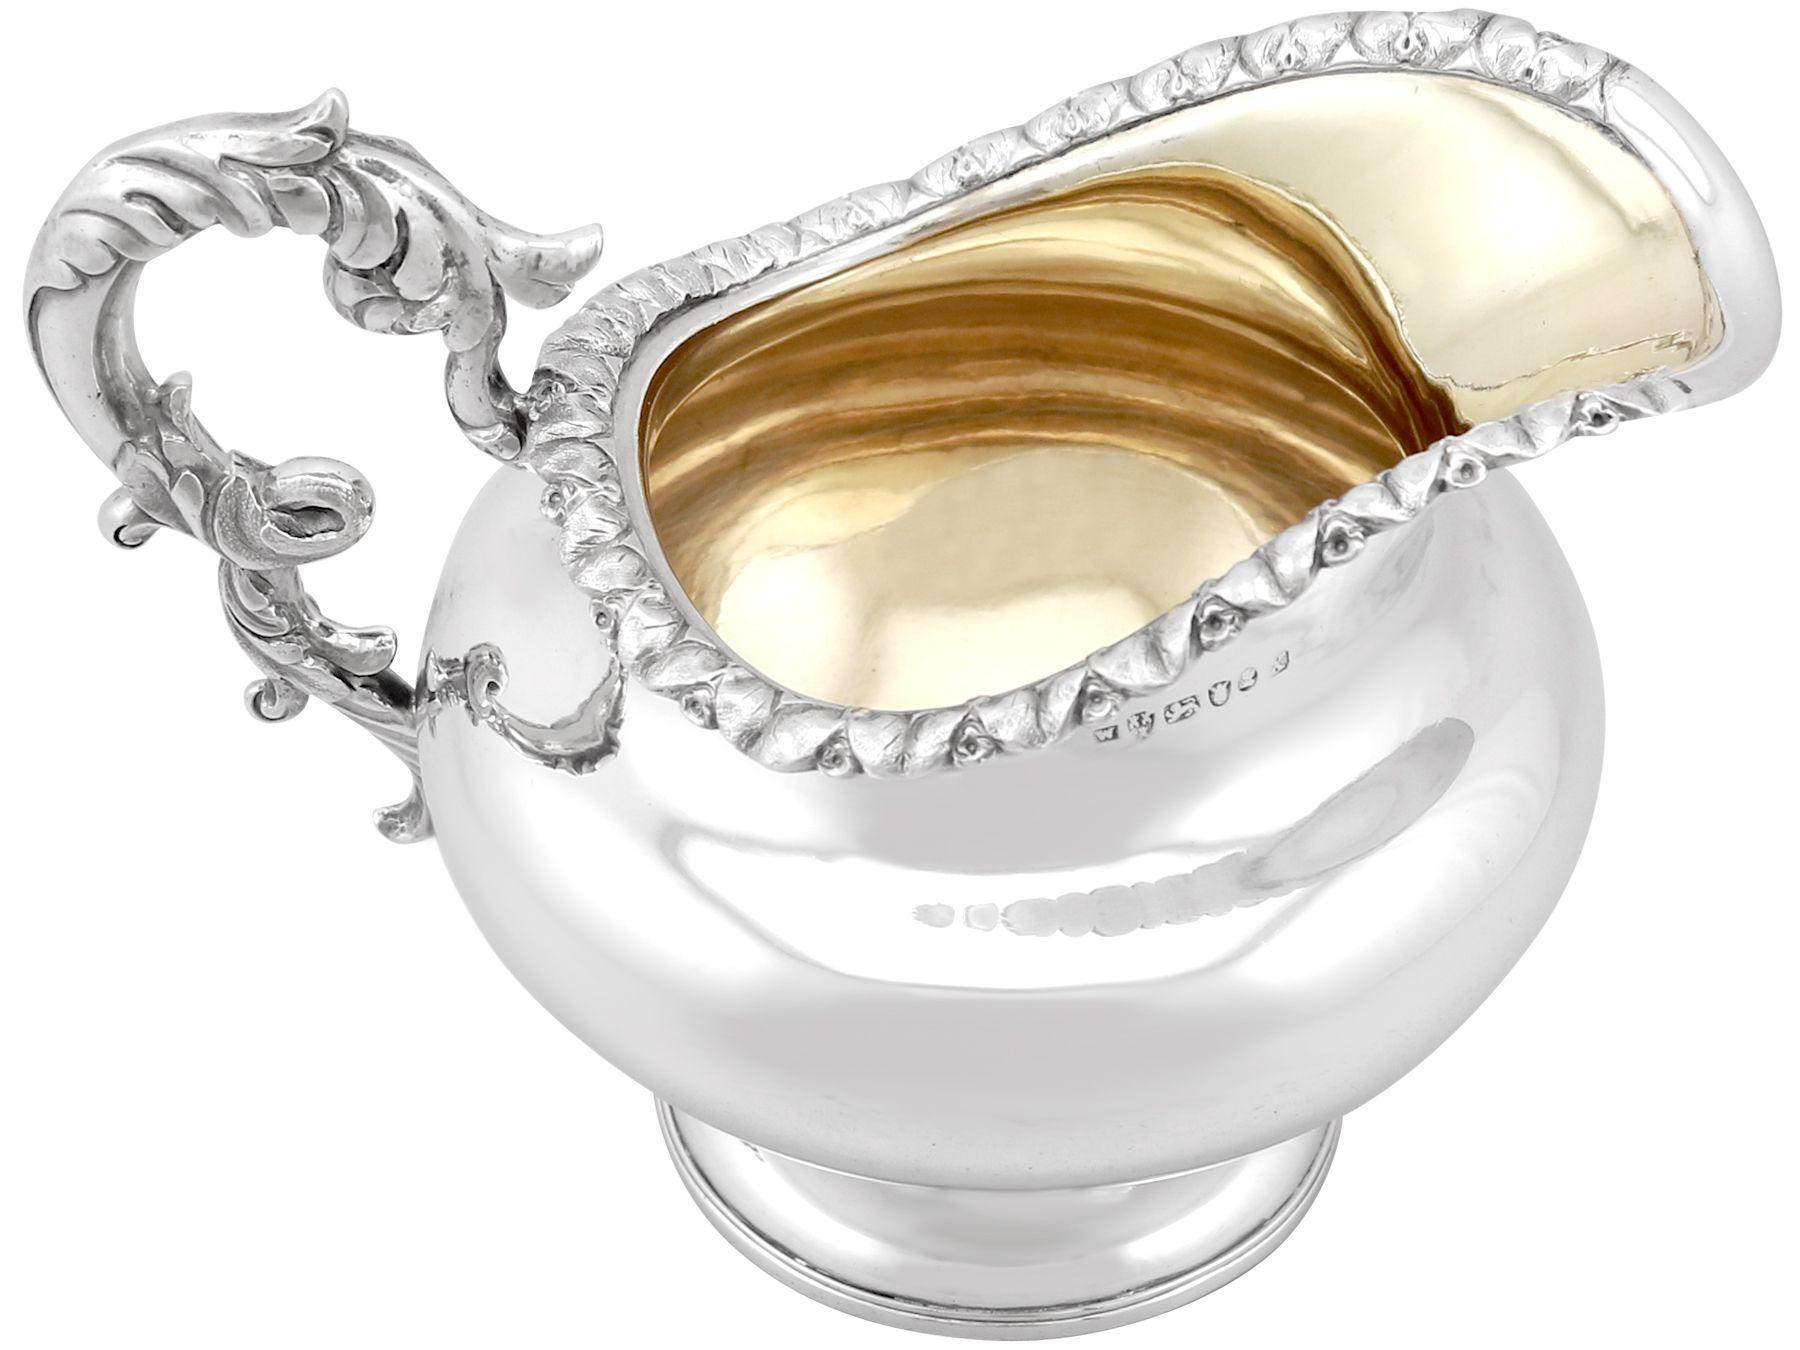 An exceptional, fine and impressive, antique Georgian Newcastle sterling silver cream jug; an addition to our silver teaware collection.

This exceptional antique Newcastle sterling silver cream jug has a circular rounded compressed form onto a